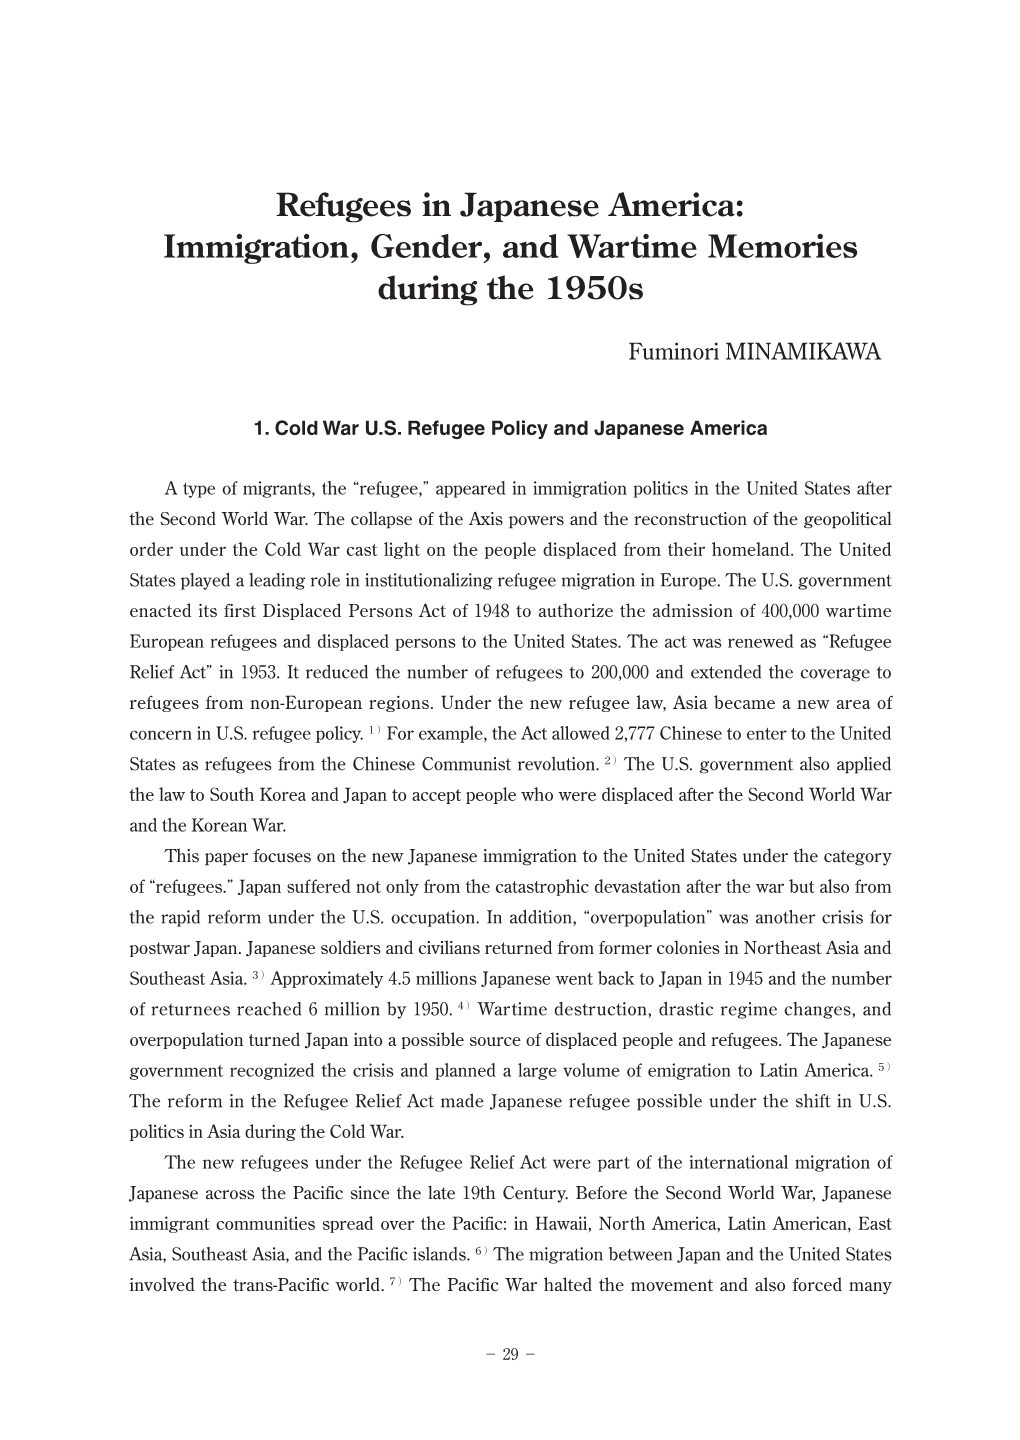 Refugees in Japanese America: Immigration, Gender, and Wartime Memories During the 1950S